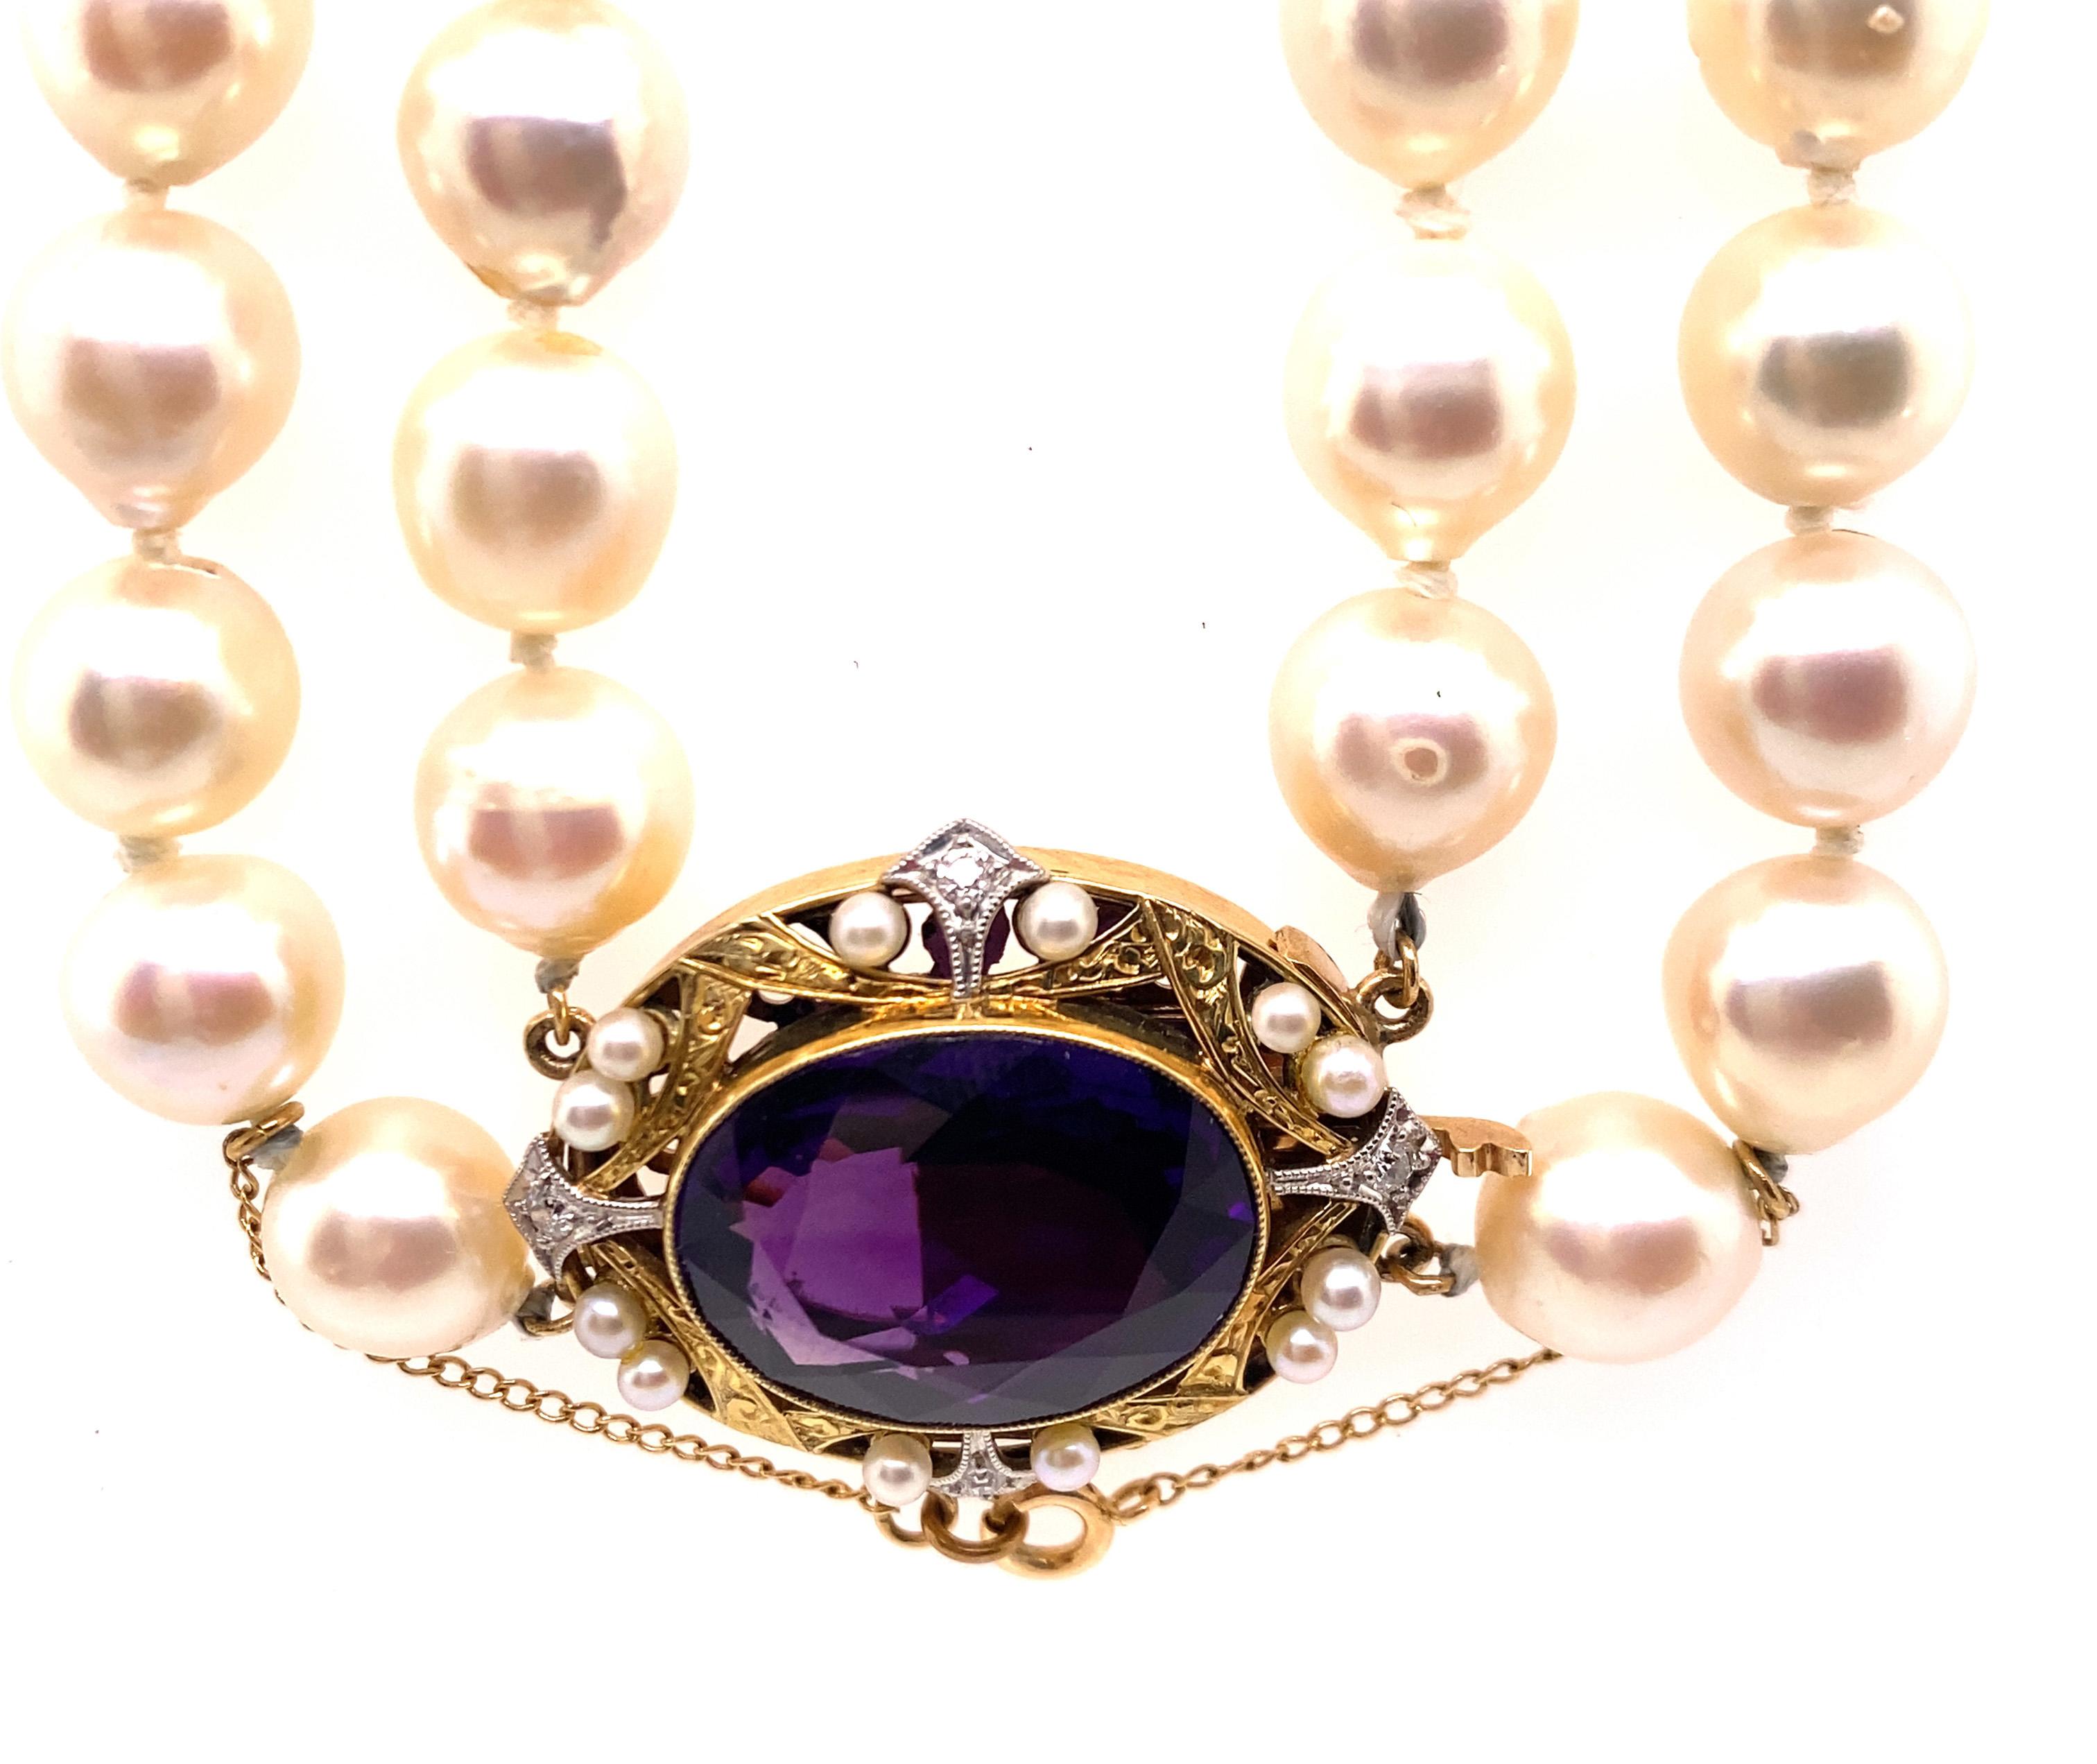 Vintage Antique 10.65ct Amethyst Diamond Pearl Necklace Double Strand 14K Gold Victorian



Featuring a 10.50ct Natural Oval Cut Amethyst Gemstone Center

Double Pearl Strand with 8.5-9.0mm Pearls

Amethyst Clasp Studded with 2.2mm Pearls and